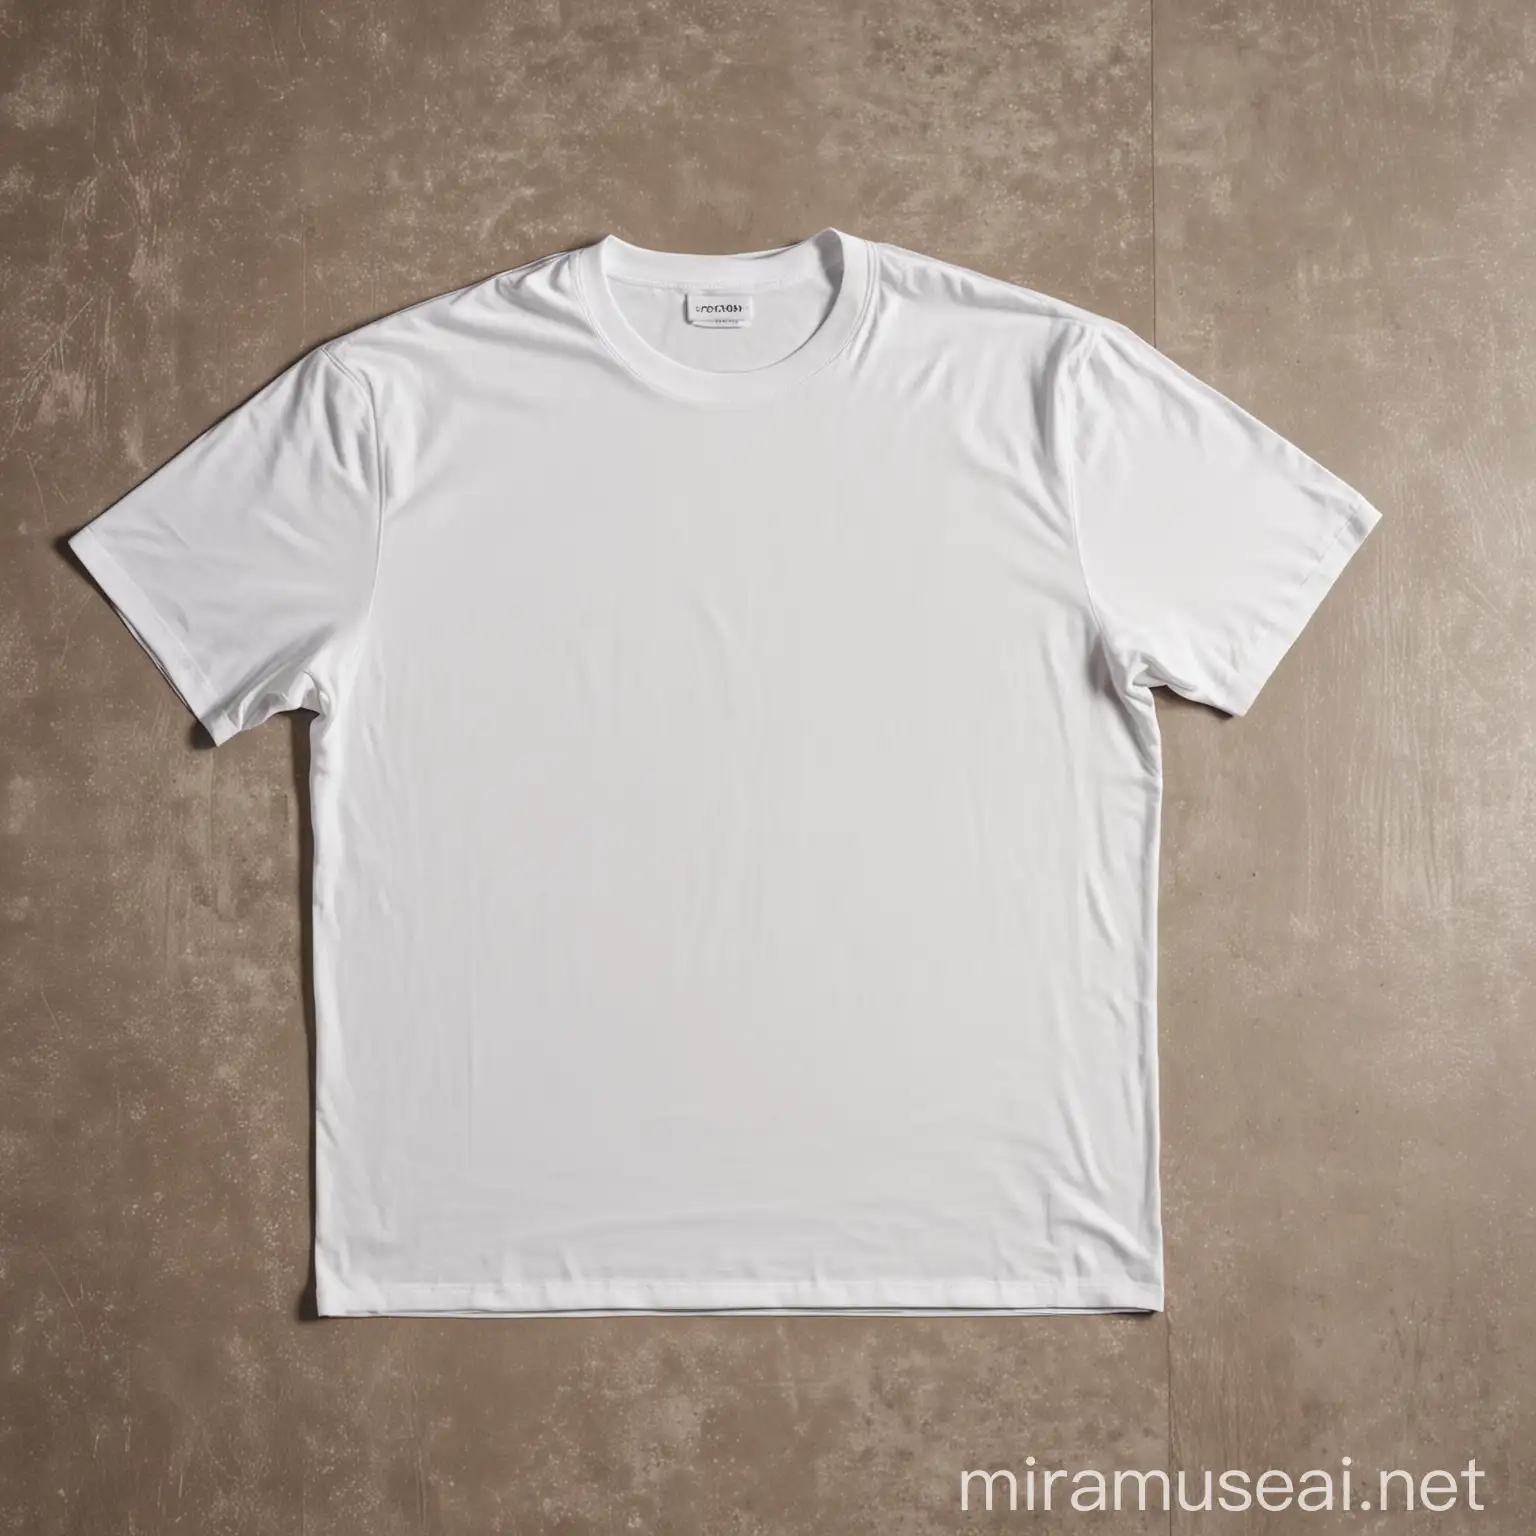 White TShirt Laid Flat on Floor with Symmetrical Ironed Look